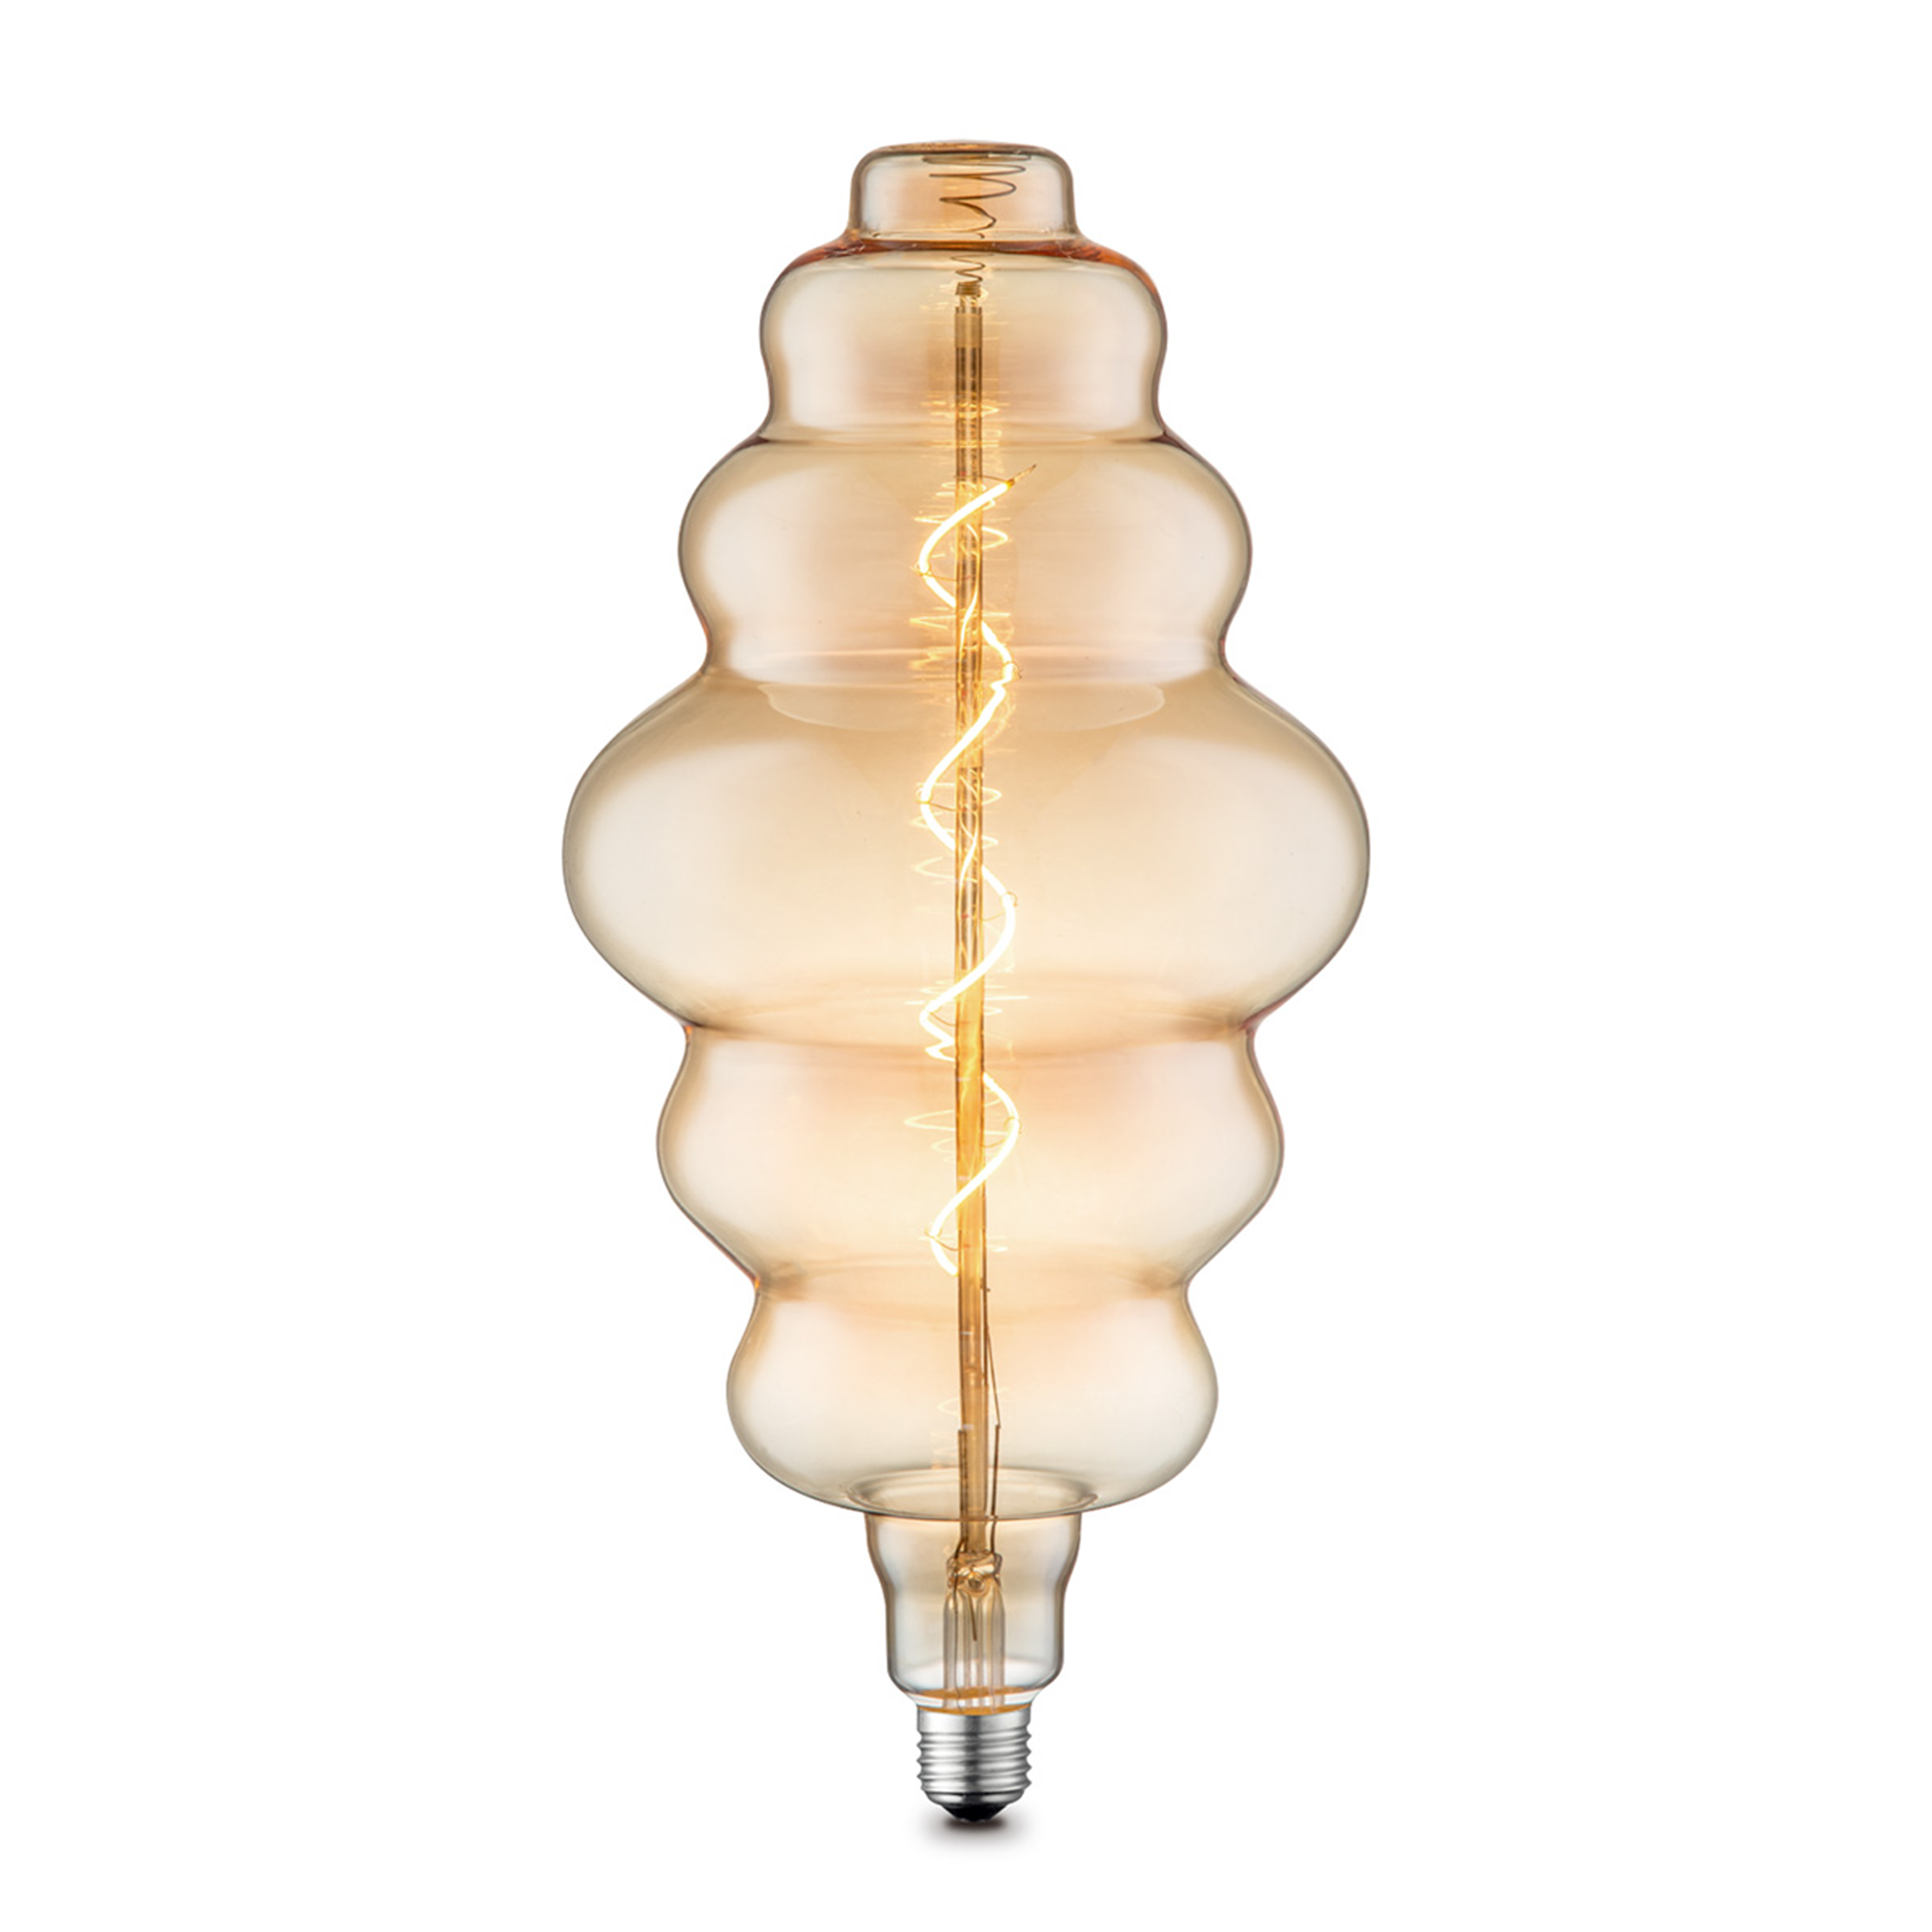 LED-Leuchtmittel 'Spiral' amber E27 4W 240 lm dimmbar + product picture